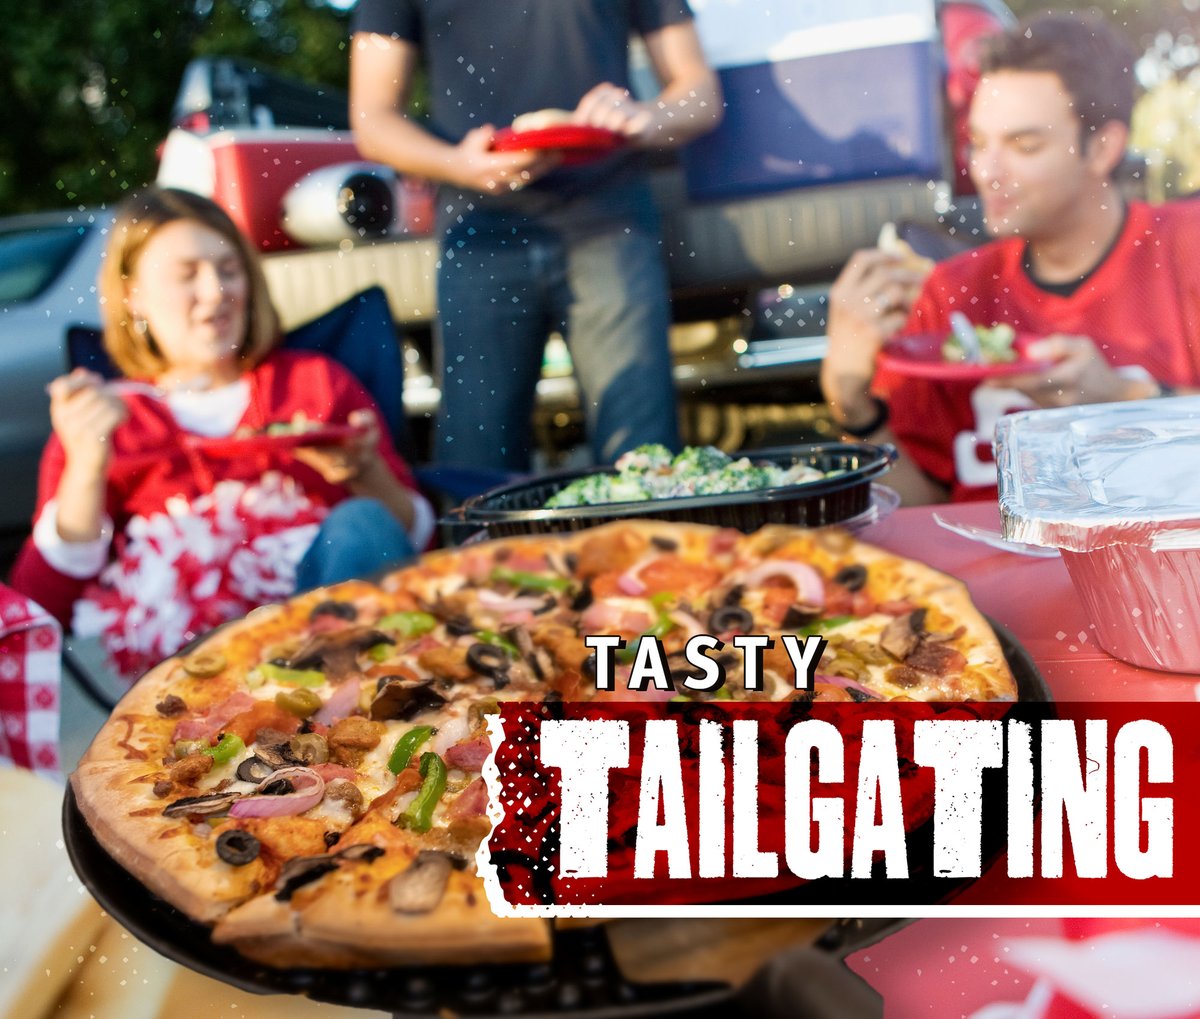 It’s a great night for football! Enjoy a pregame meal at our buffet or order to-go for a tasty tailgate party!! 
#GameDay #Tailgate #FridayNightLights #Football🏈 #EatPizzaWinGamesRepeat #FridayNightPizzaNight #PizzaRanchForTheWin